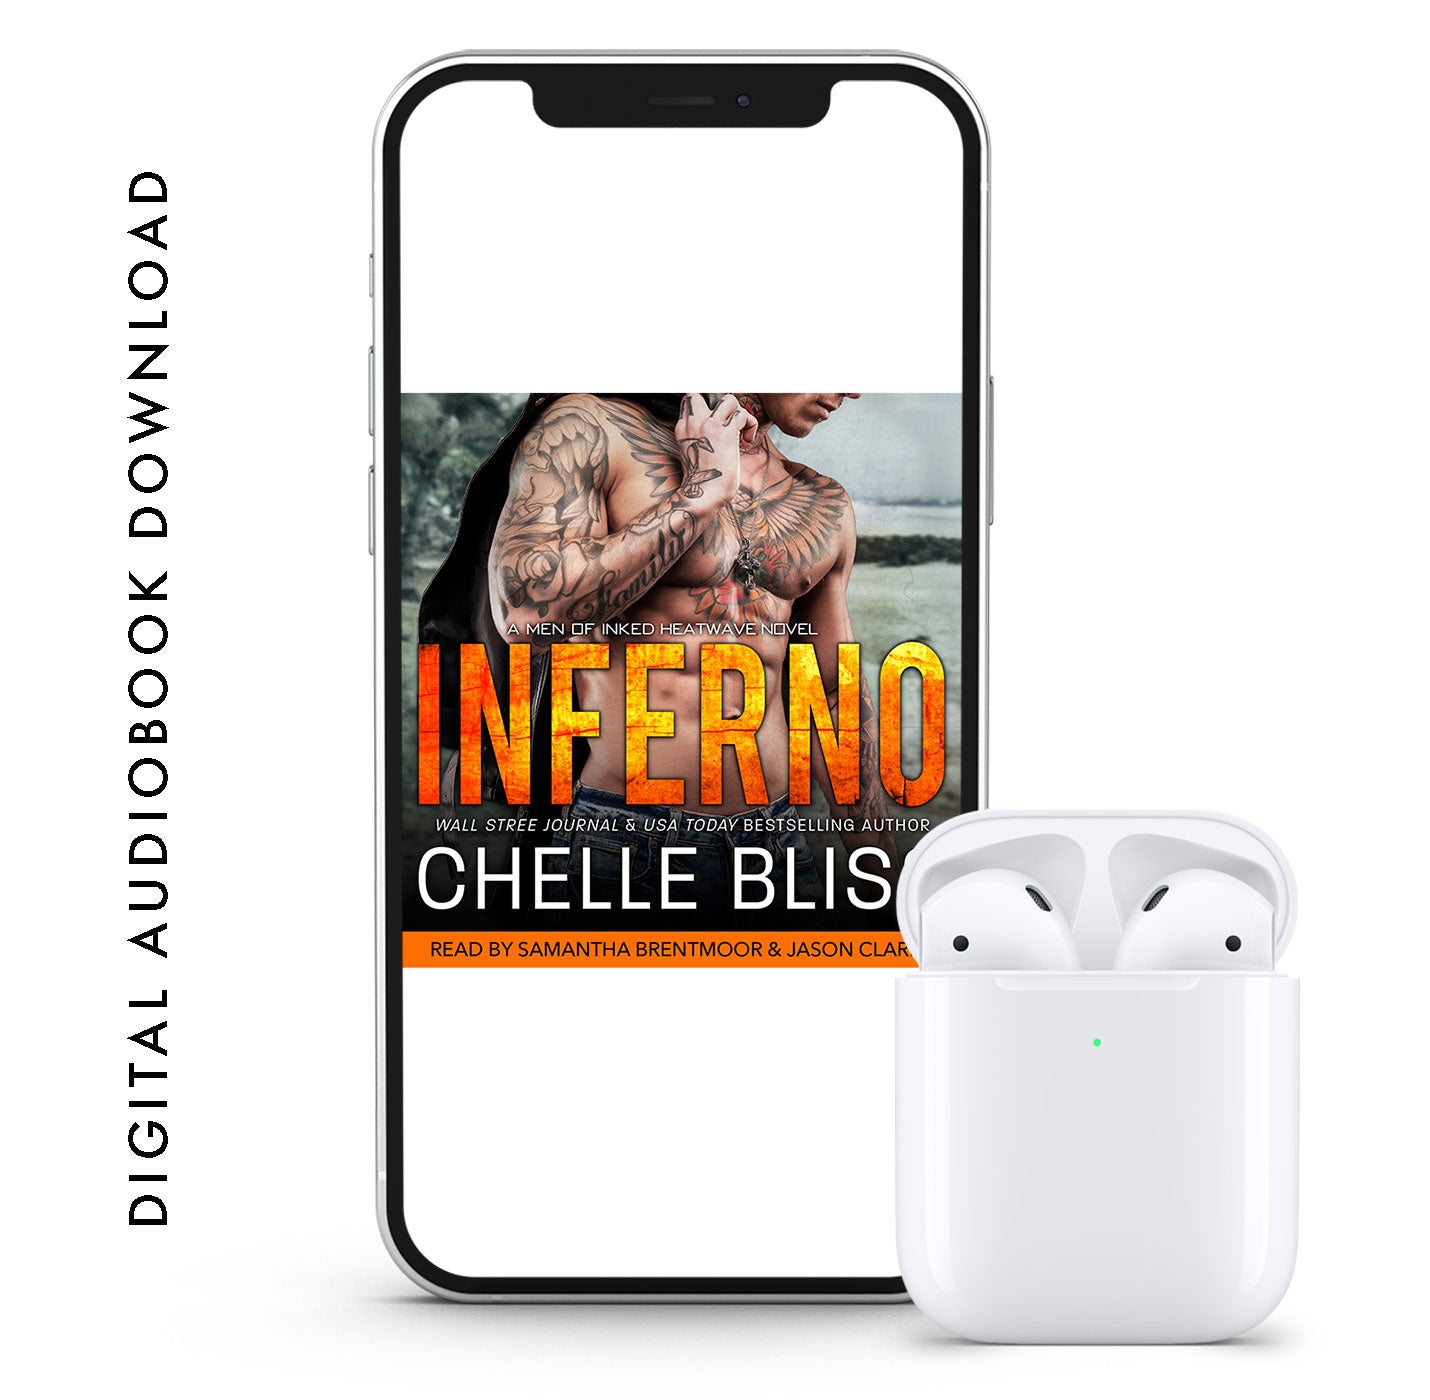 inferno audiobook by chelle bliss tattood man 